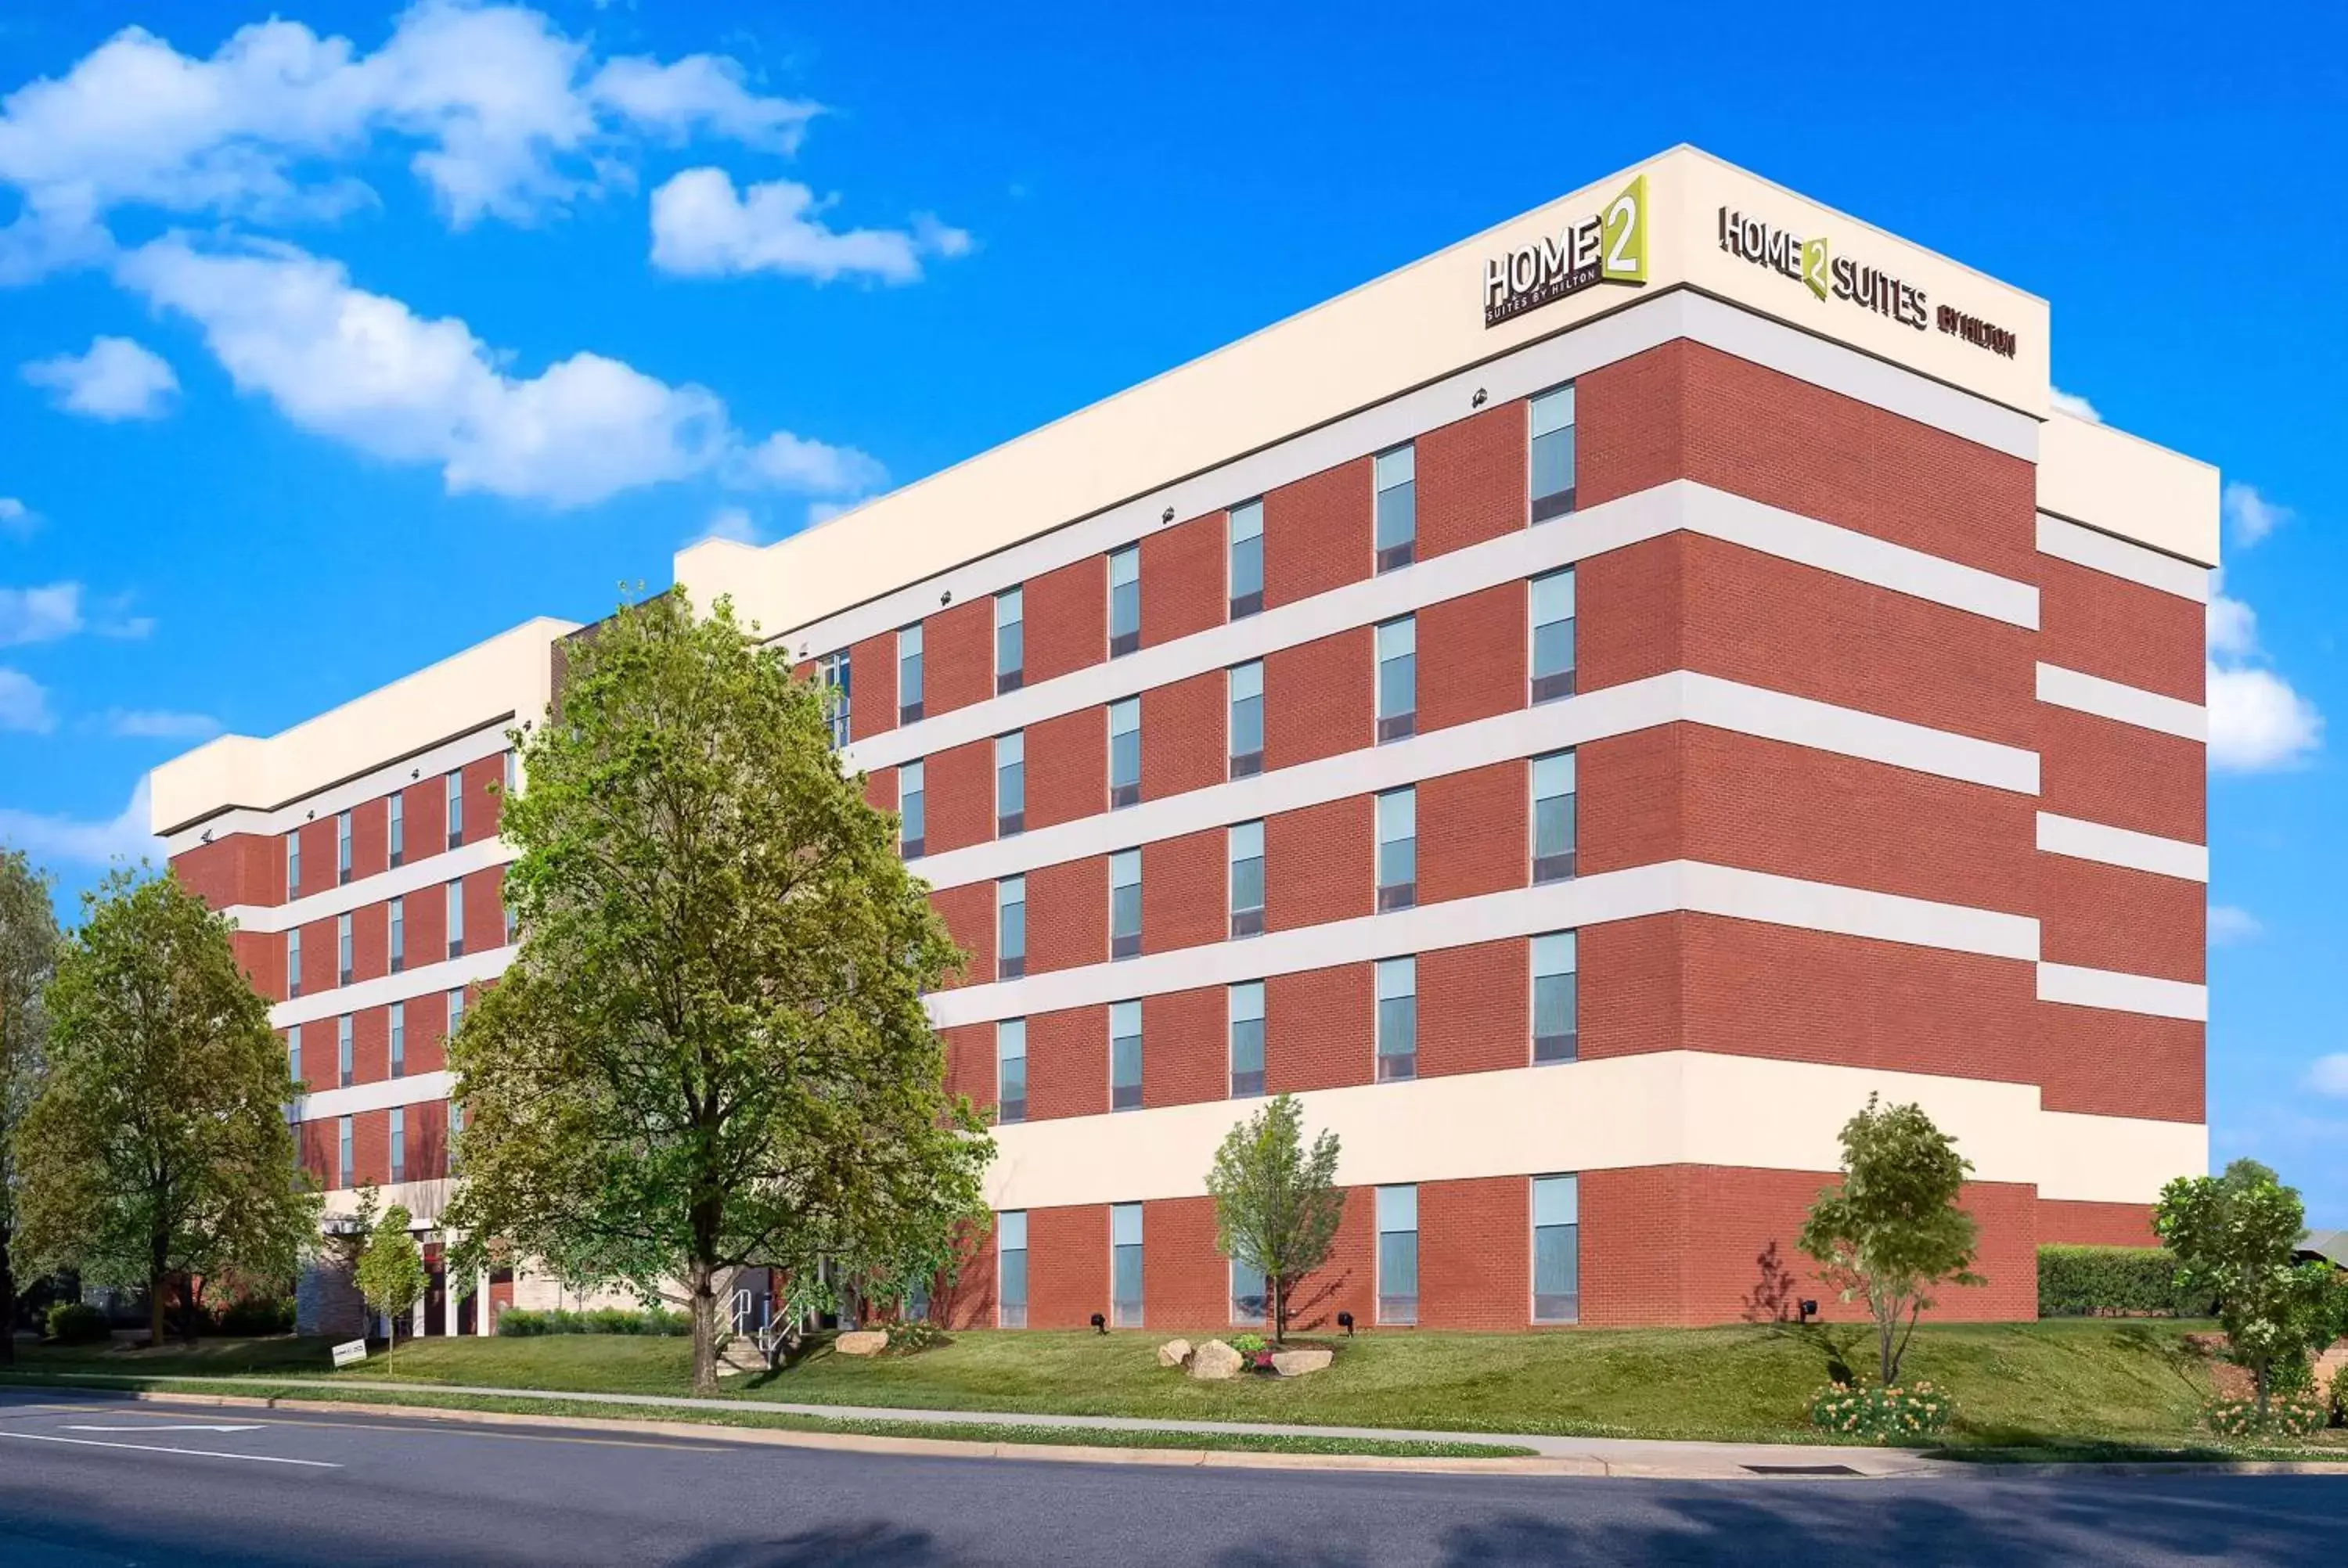 Property Building in Home2 Suites by Hilton Charlotte University Research Park